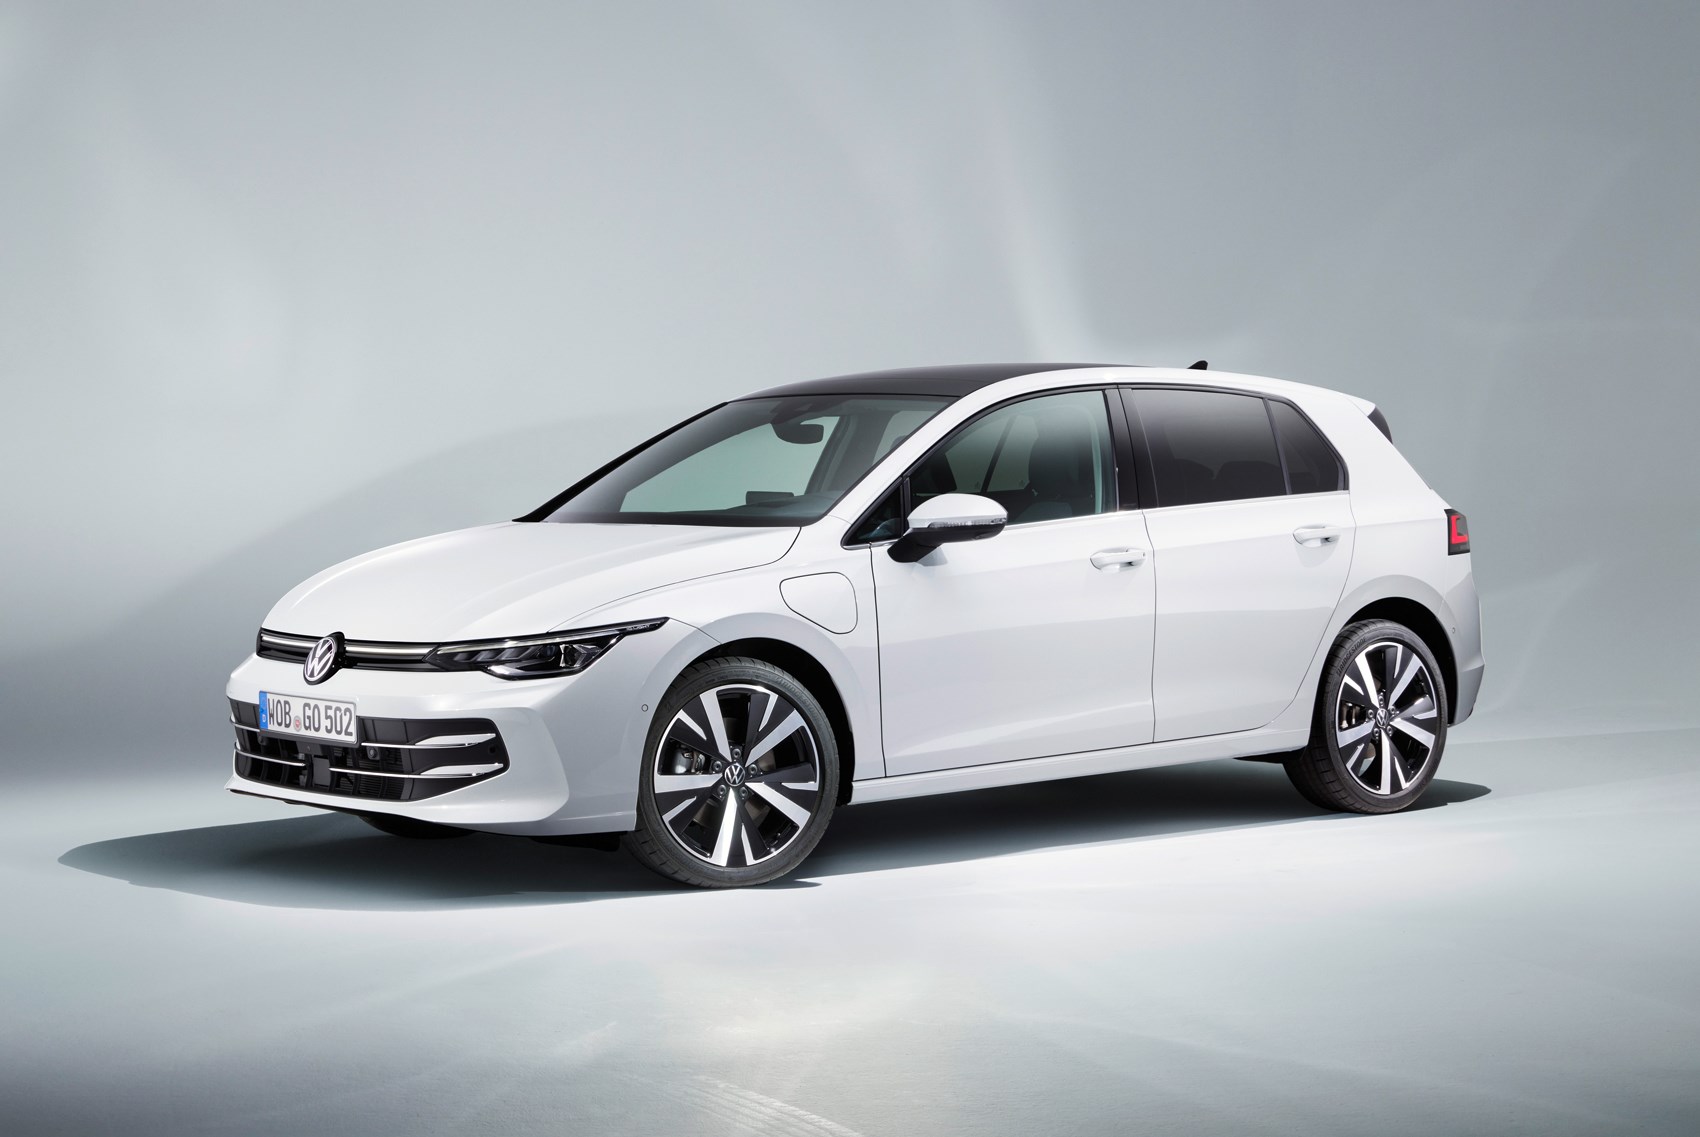 Volkswagen Golf 8 - The legacy continues!